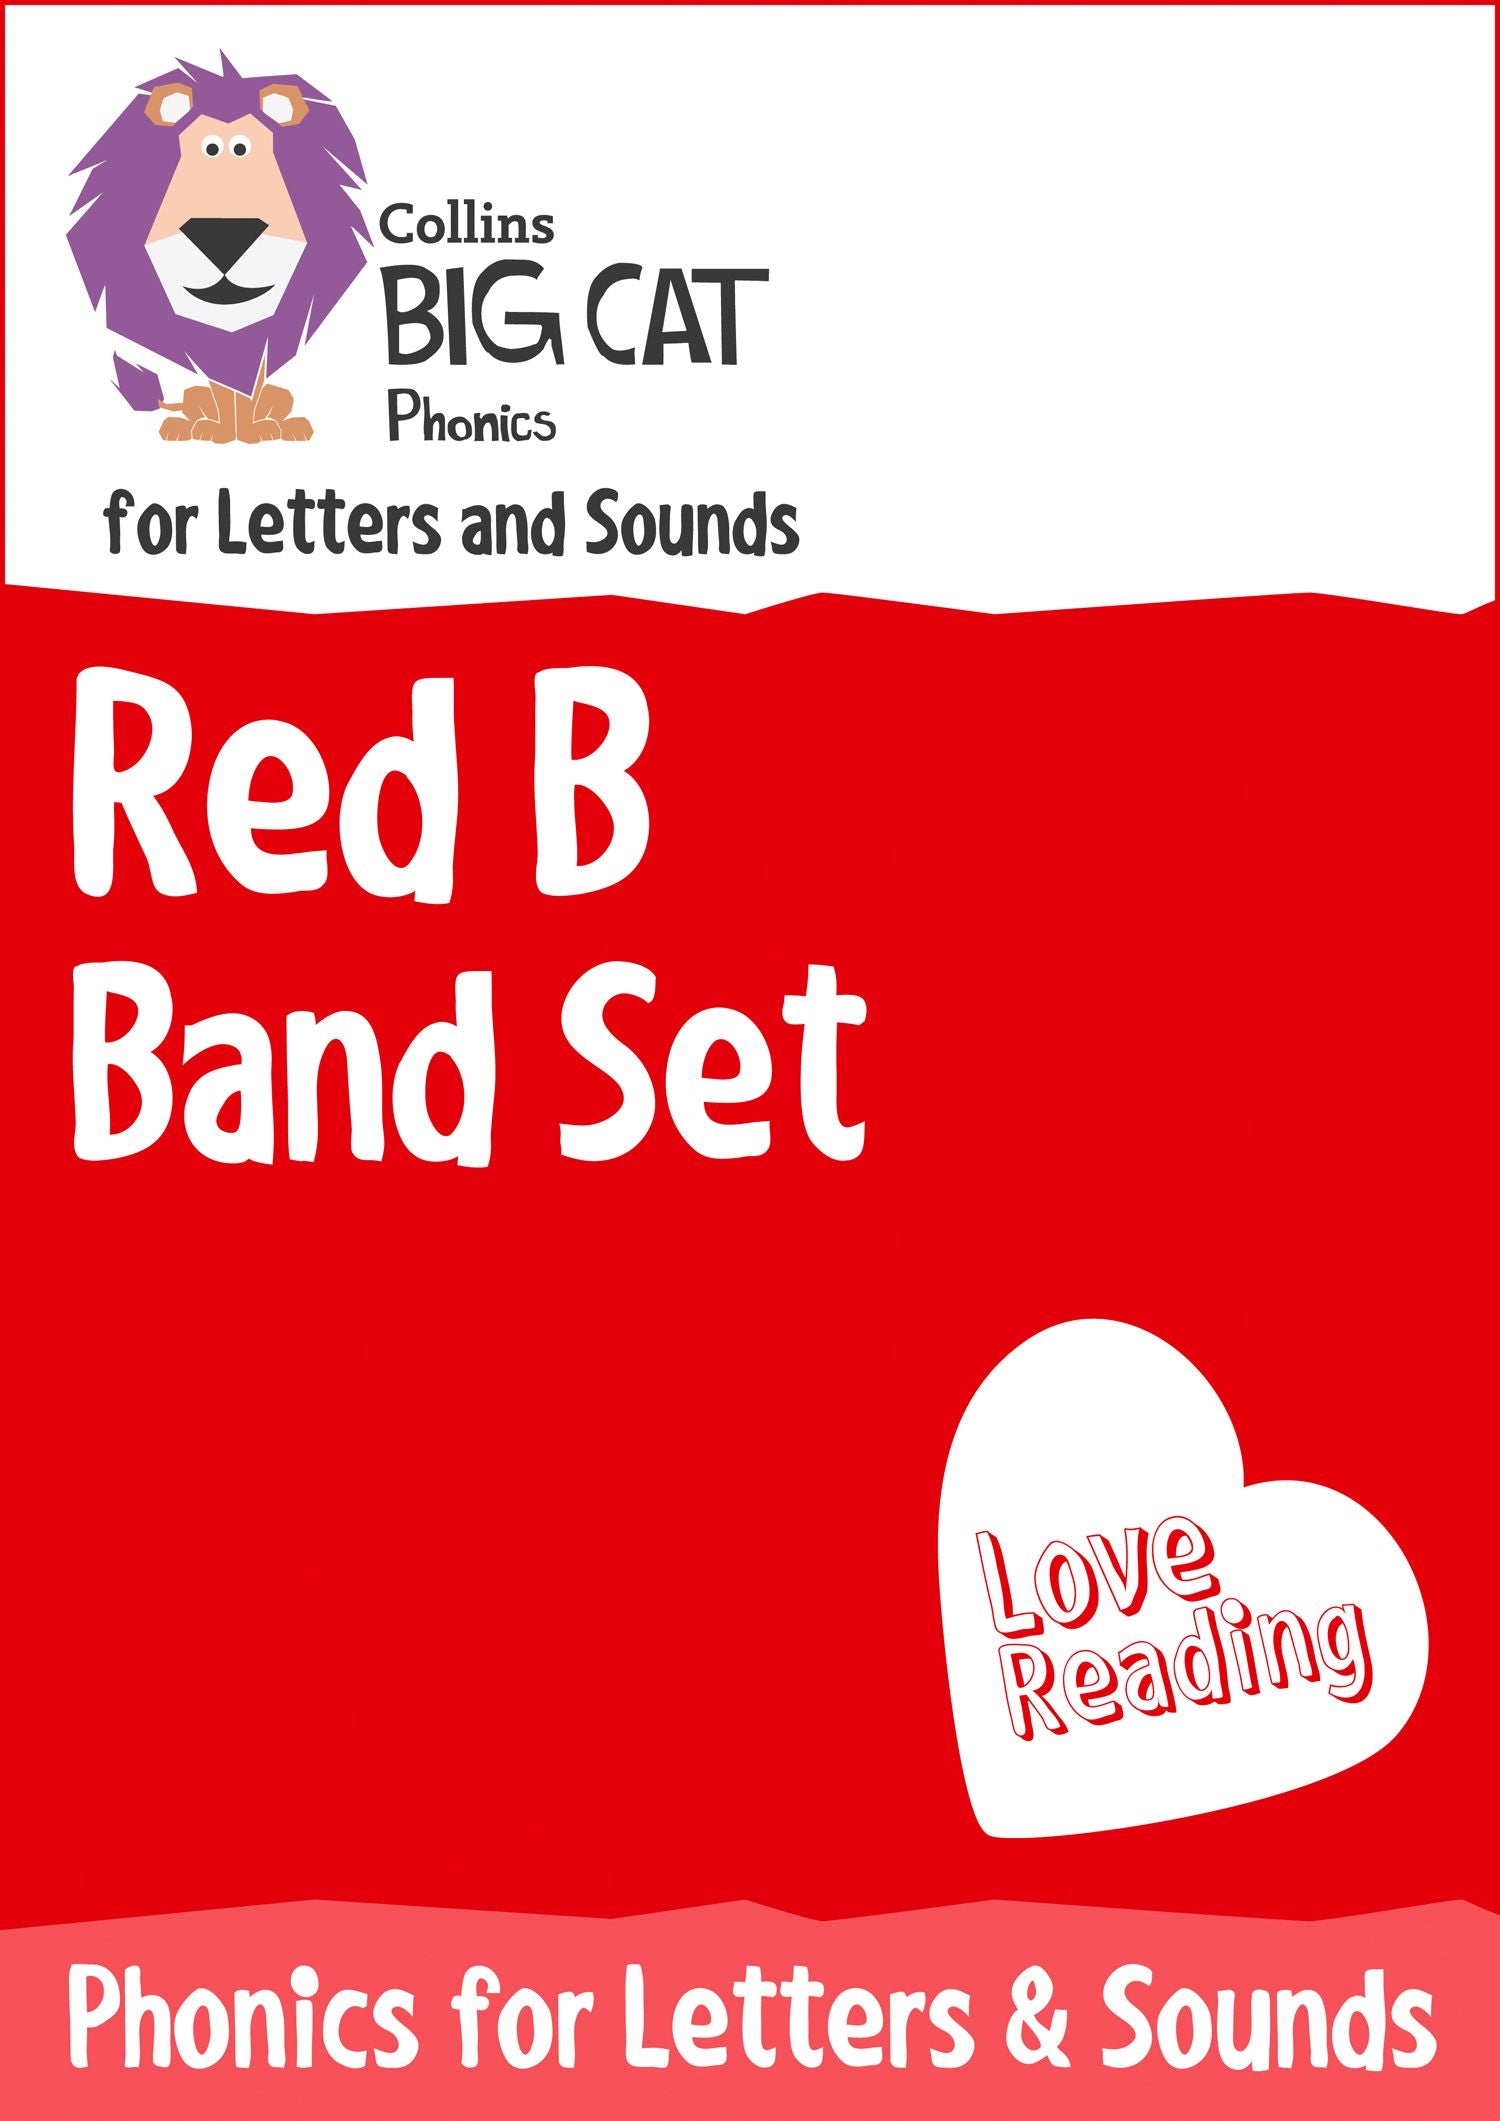 Collins Big Cat Sets - Phonics for Letters and Sounds Red B Band Set